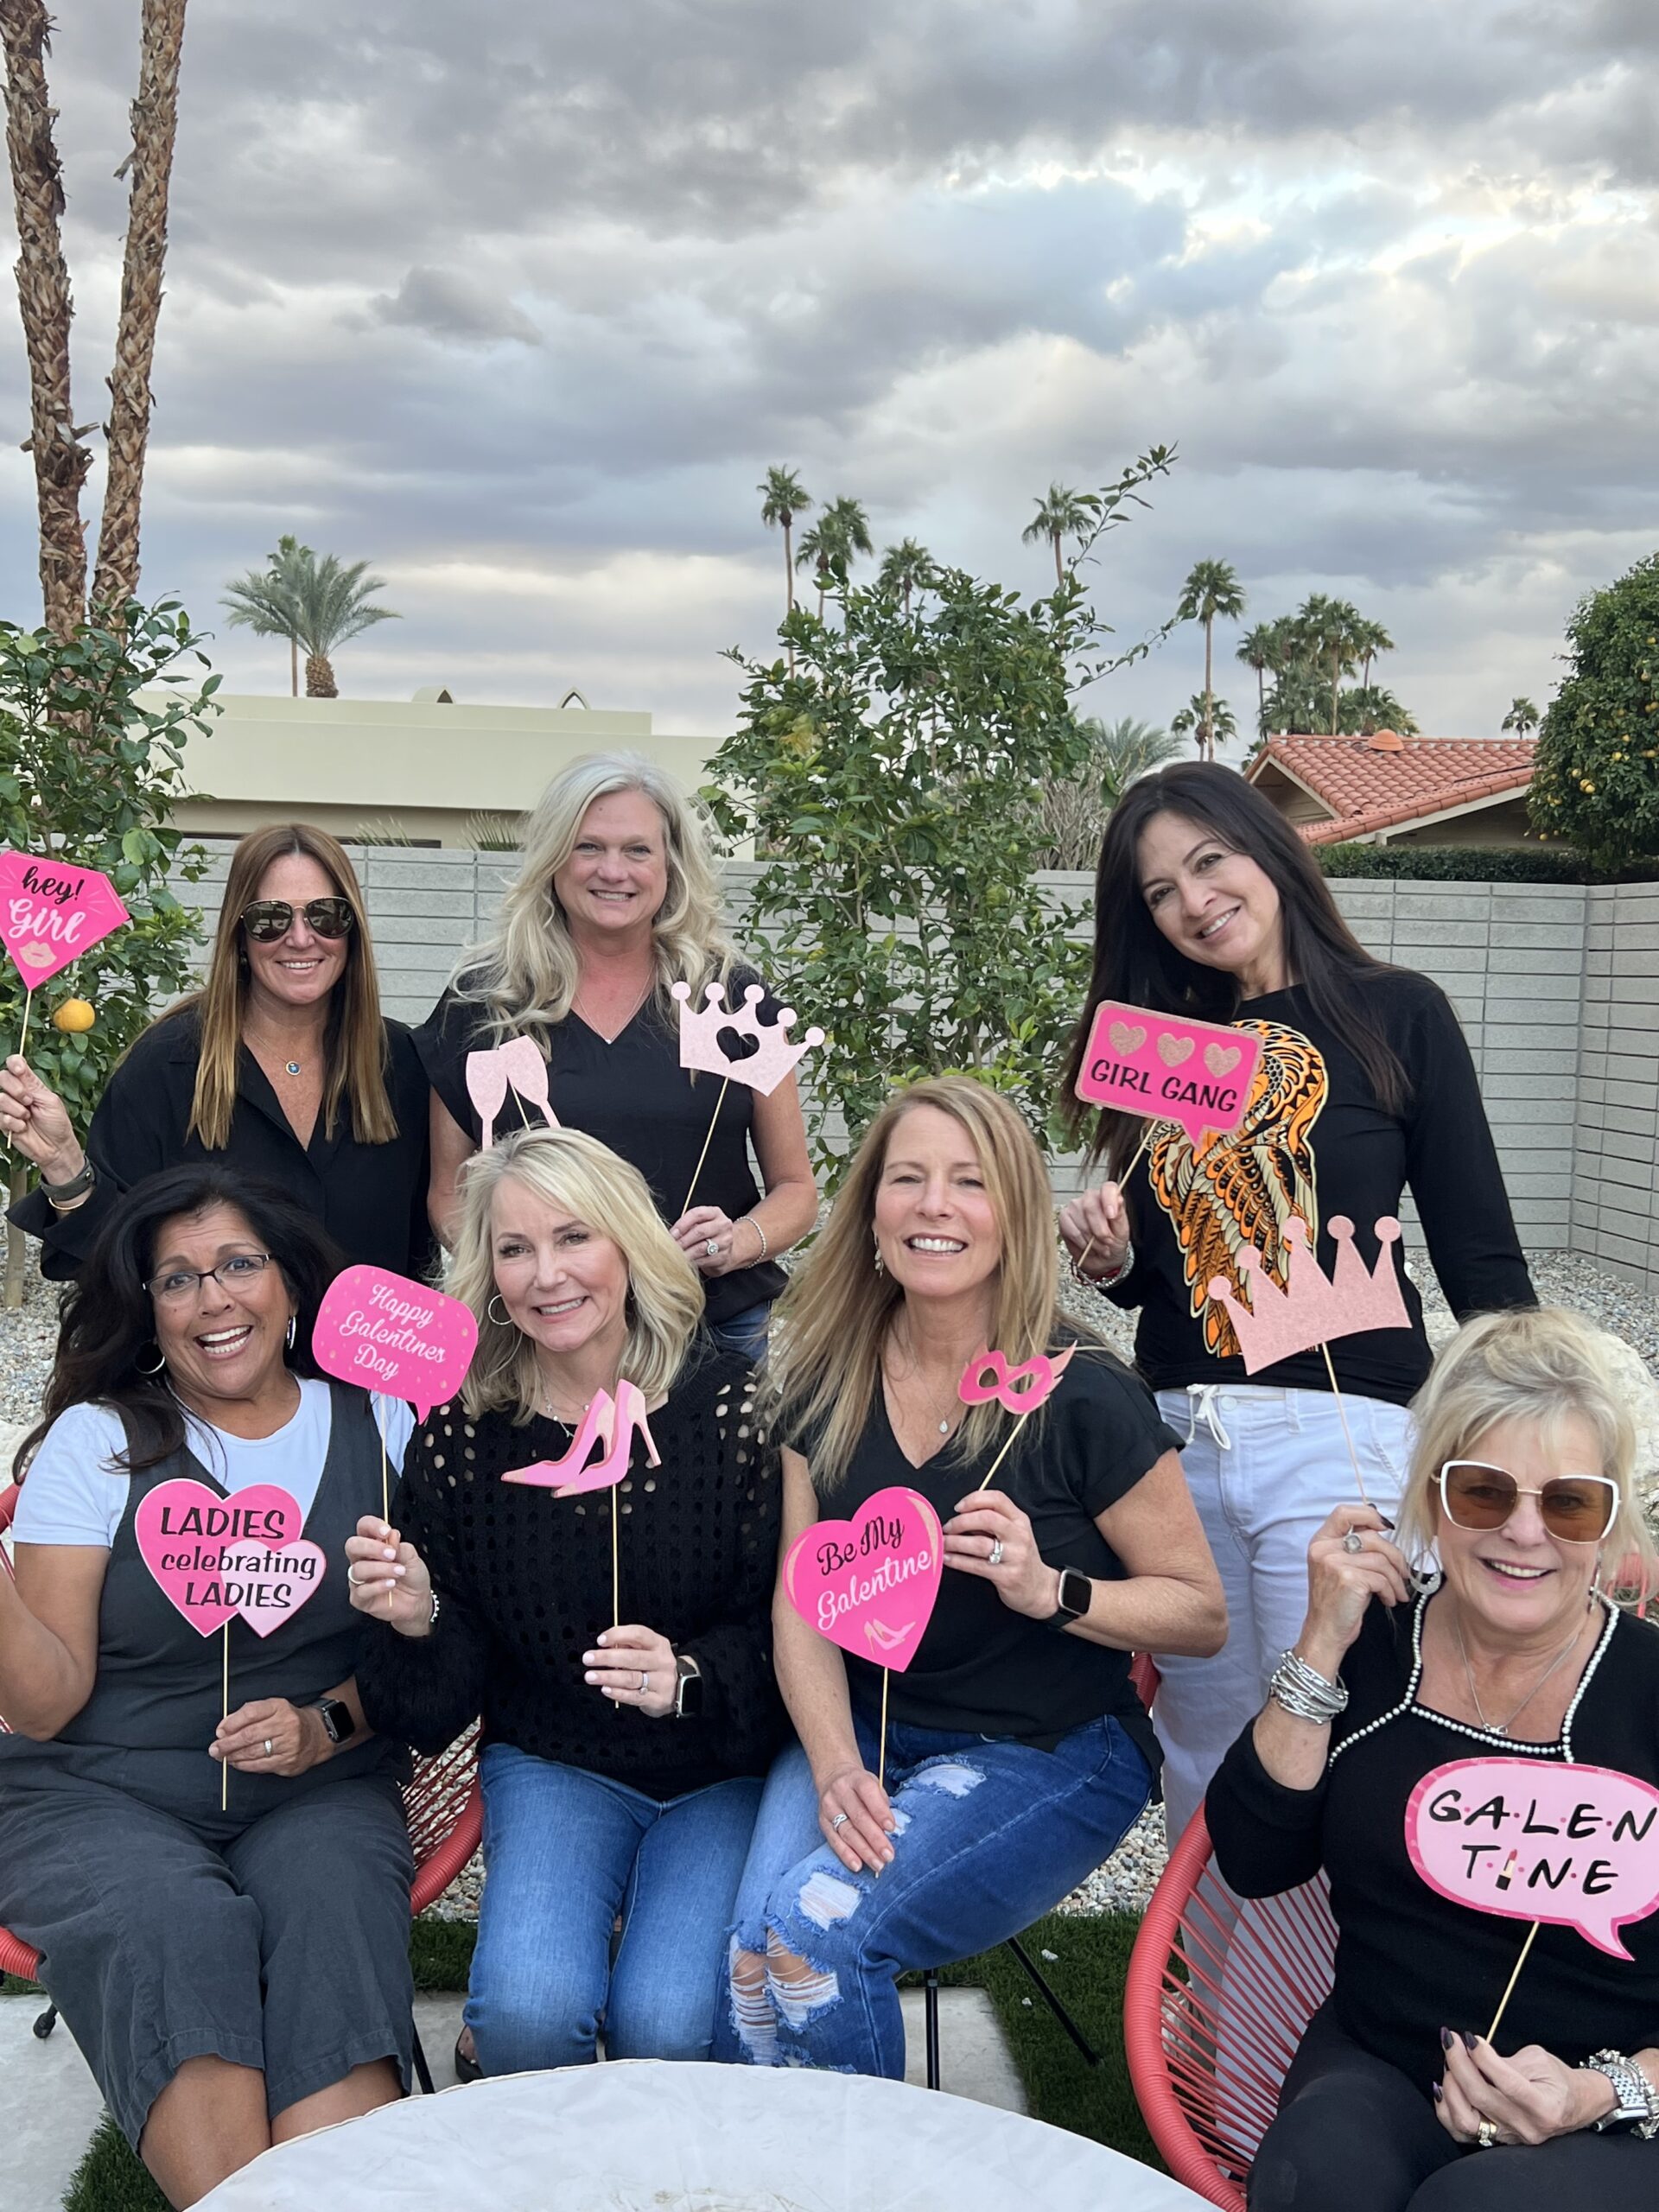 Galentine's DAY - BUNCH OF GIRLS WITH FUN SIGNS